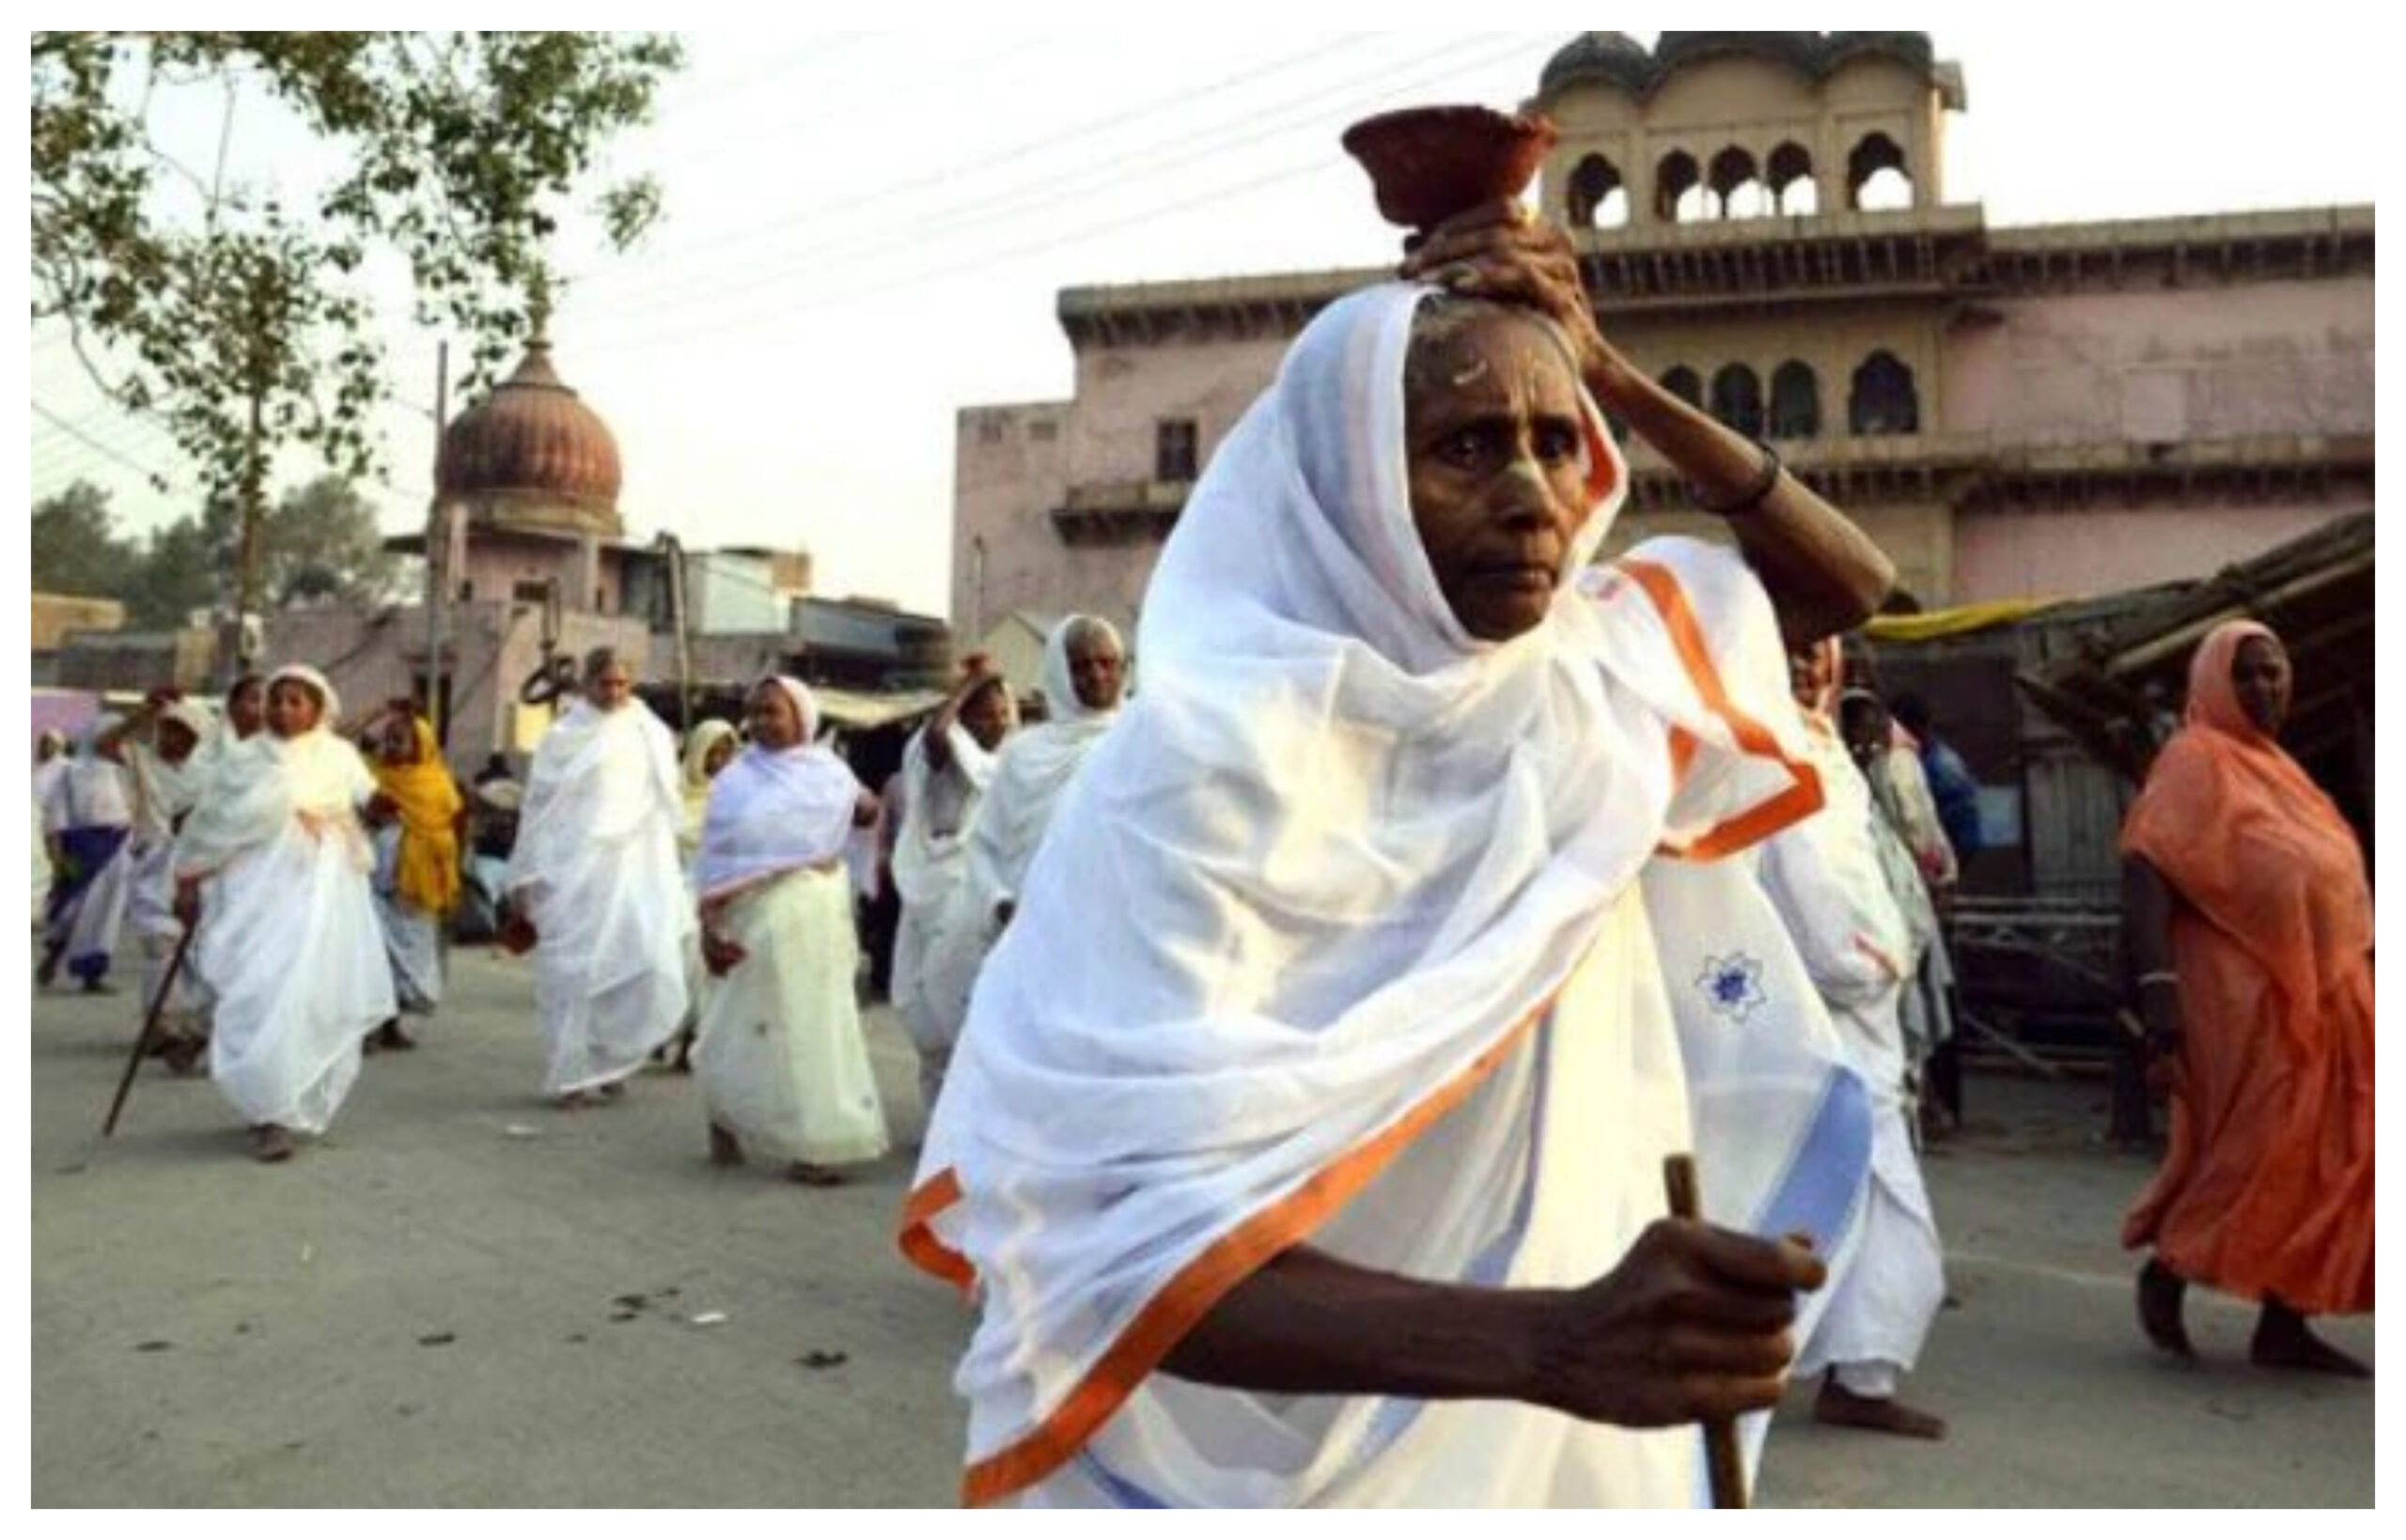 Uttar Pradesh: Widows living in anonymity in Vrindavan, no political party ever took any care, vrindavan, uttar pradesh news, loksabha election 2024 news, totaltv news in hindi